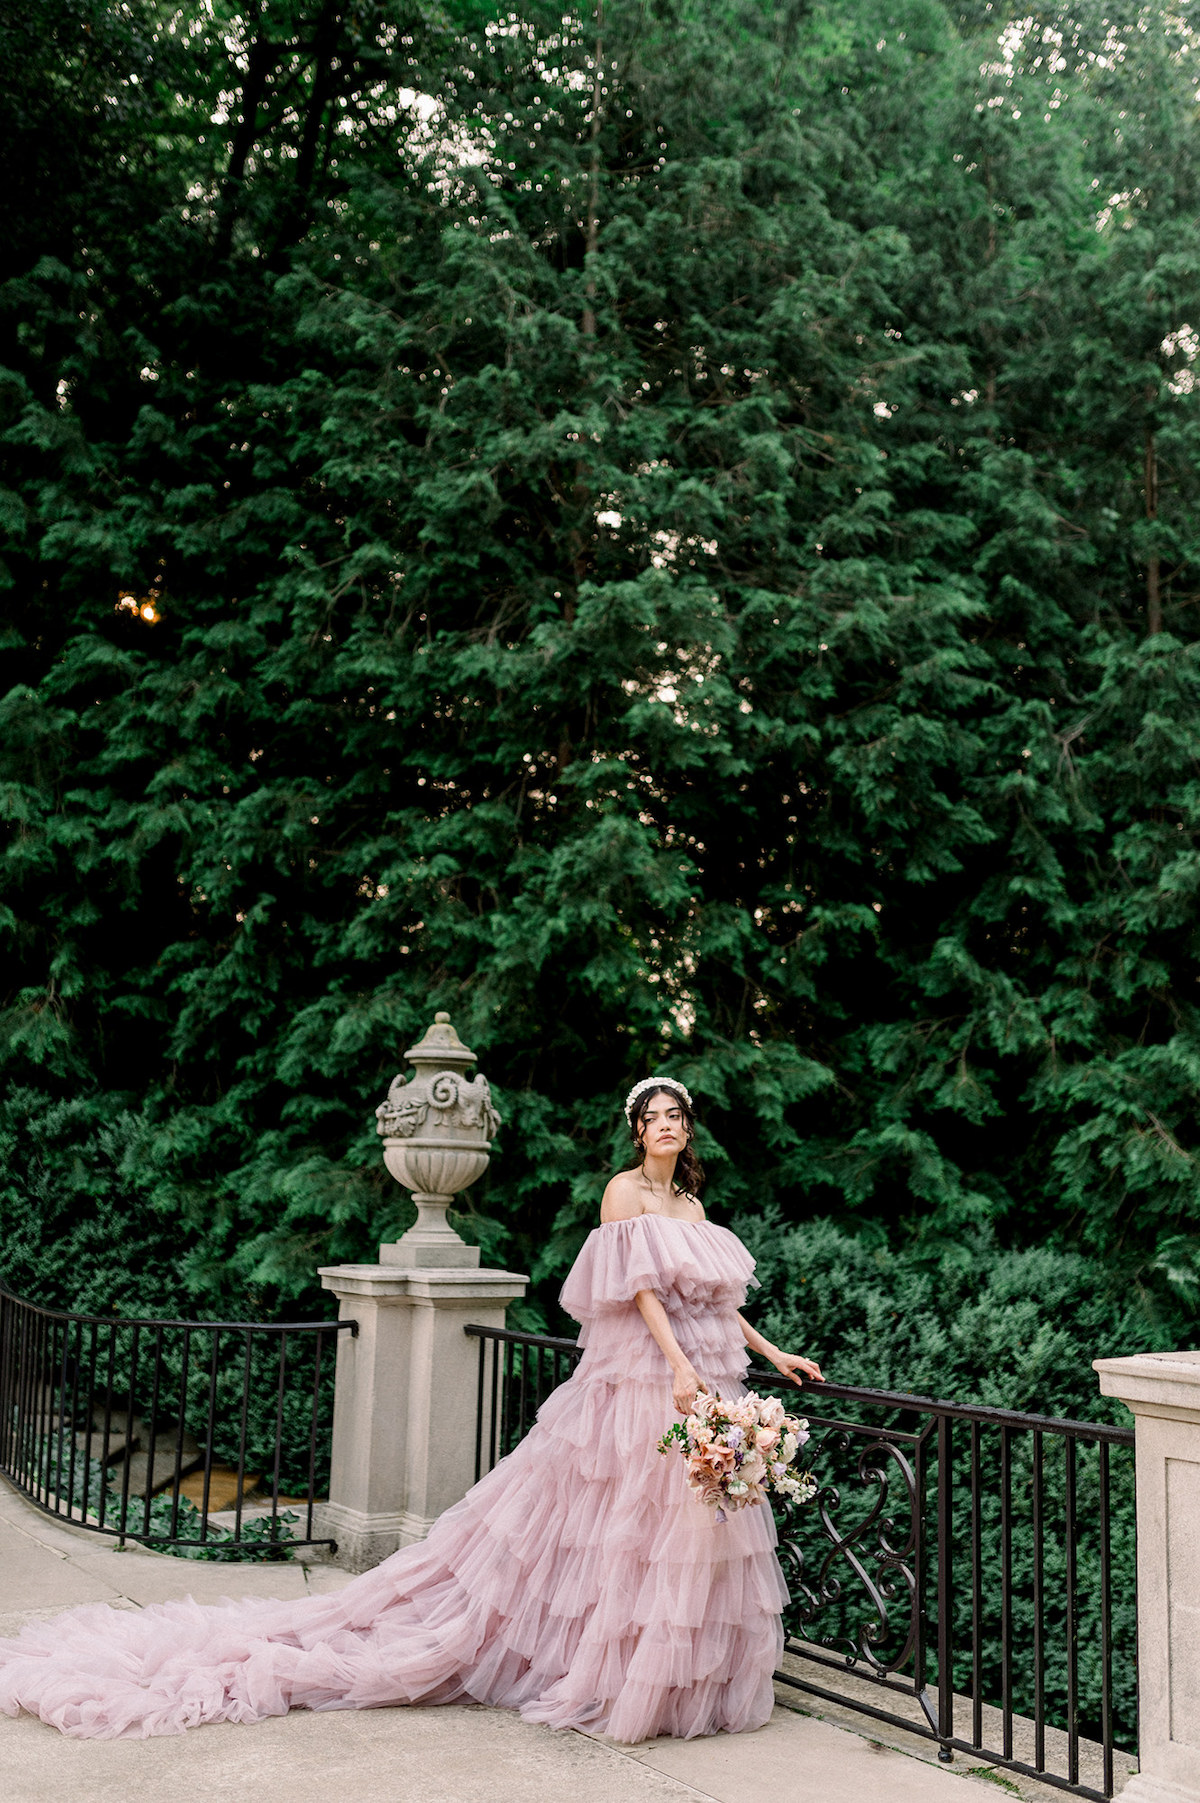 A captivating moment as Karla, dressed in the exquisite couture gown, showcases her modeling prowess with a high-fashion editorial pose at Longwood Gardens.